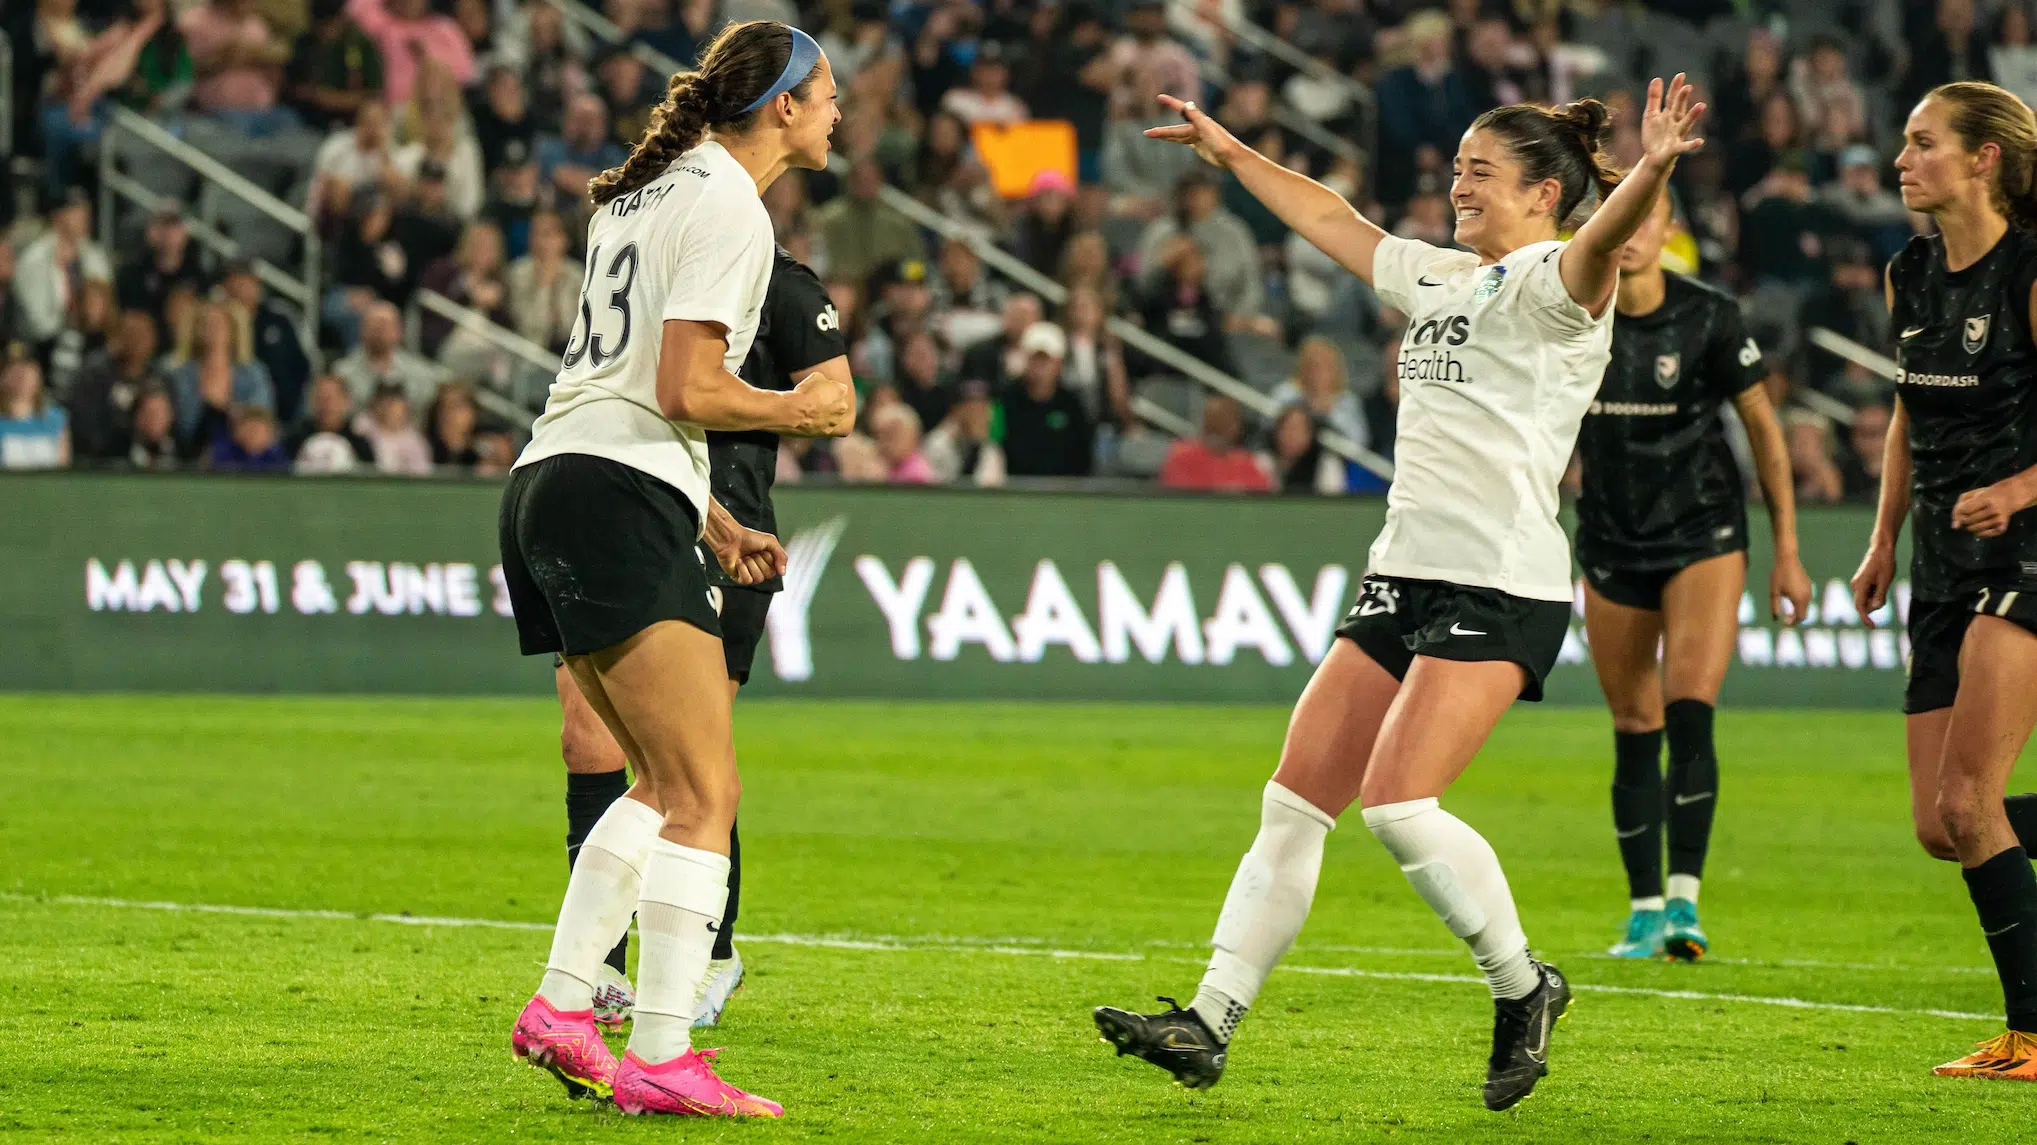 Ashley Hatch in a white top, black shorts and pink cleats pumps her fist in celebration as Marissa Sheva in a white top, black shorts and black cleats runs towards her with her arms wide open smiling.